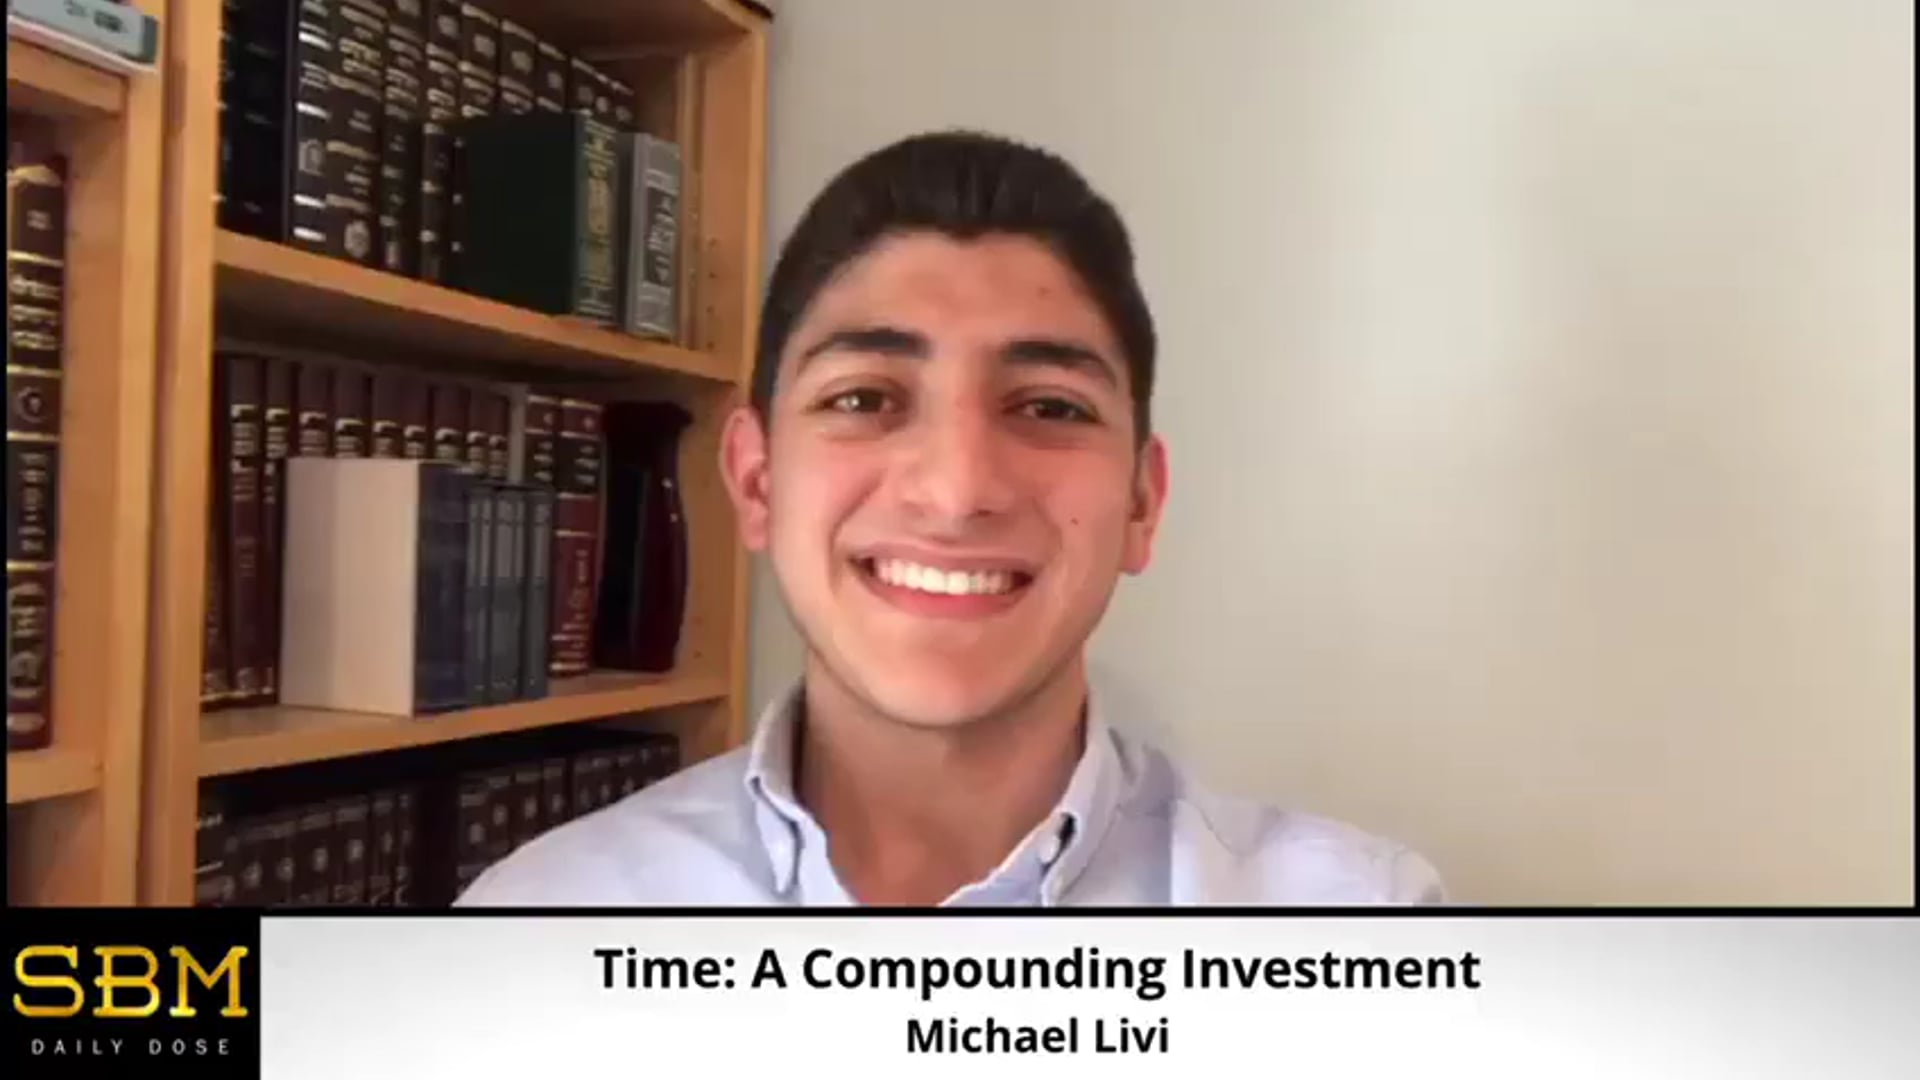 Time: A Compounding Investment - Michael Livi